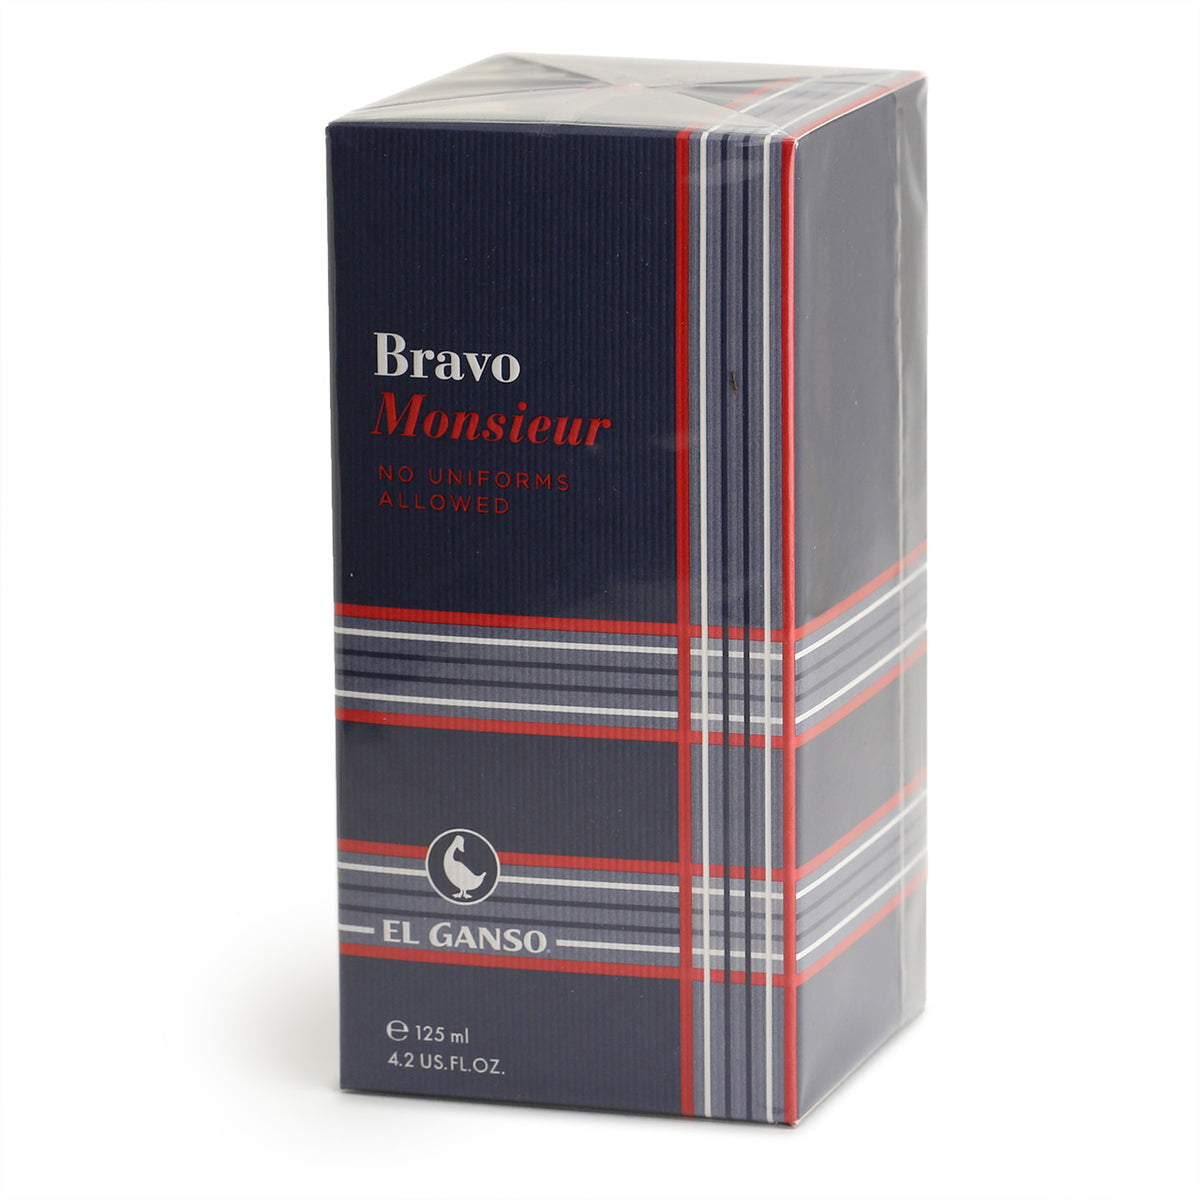 Bravo Monsieur Packaging with a large graphic check pattern of navy, blue-grey, red and white.